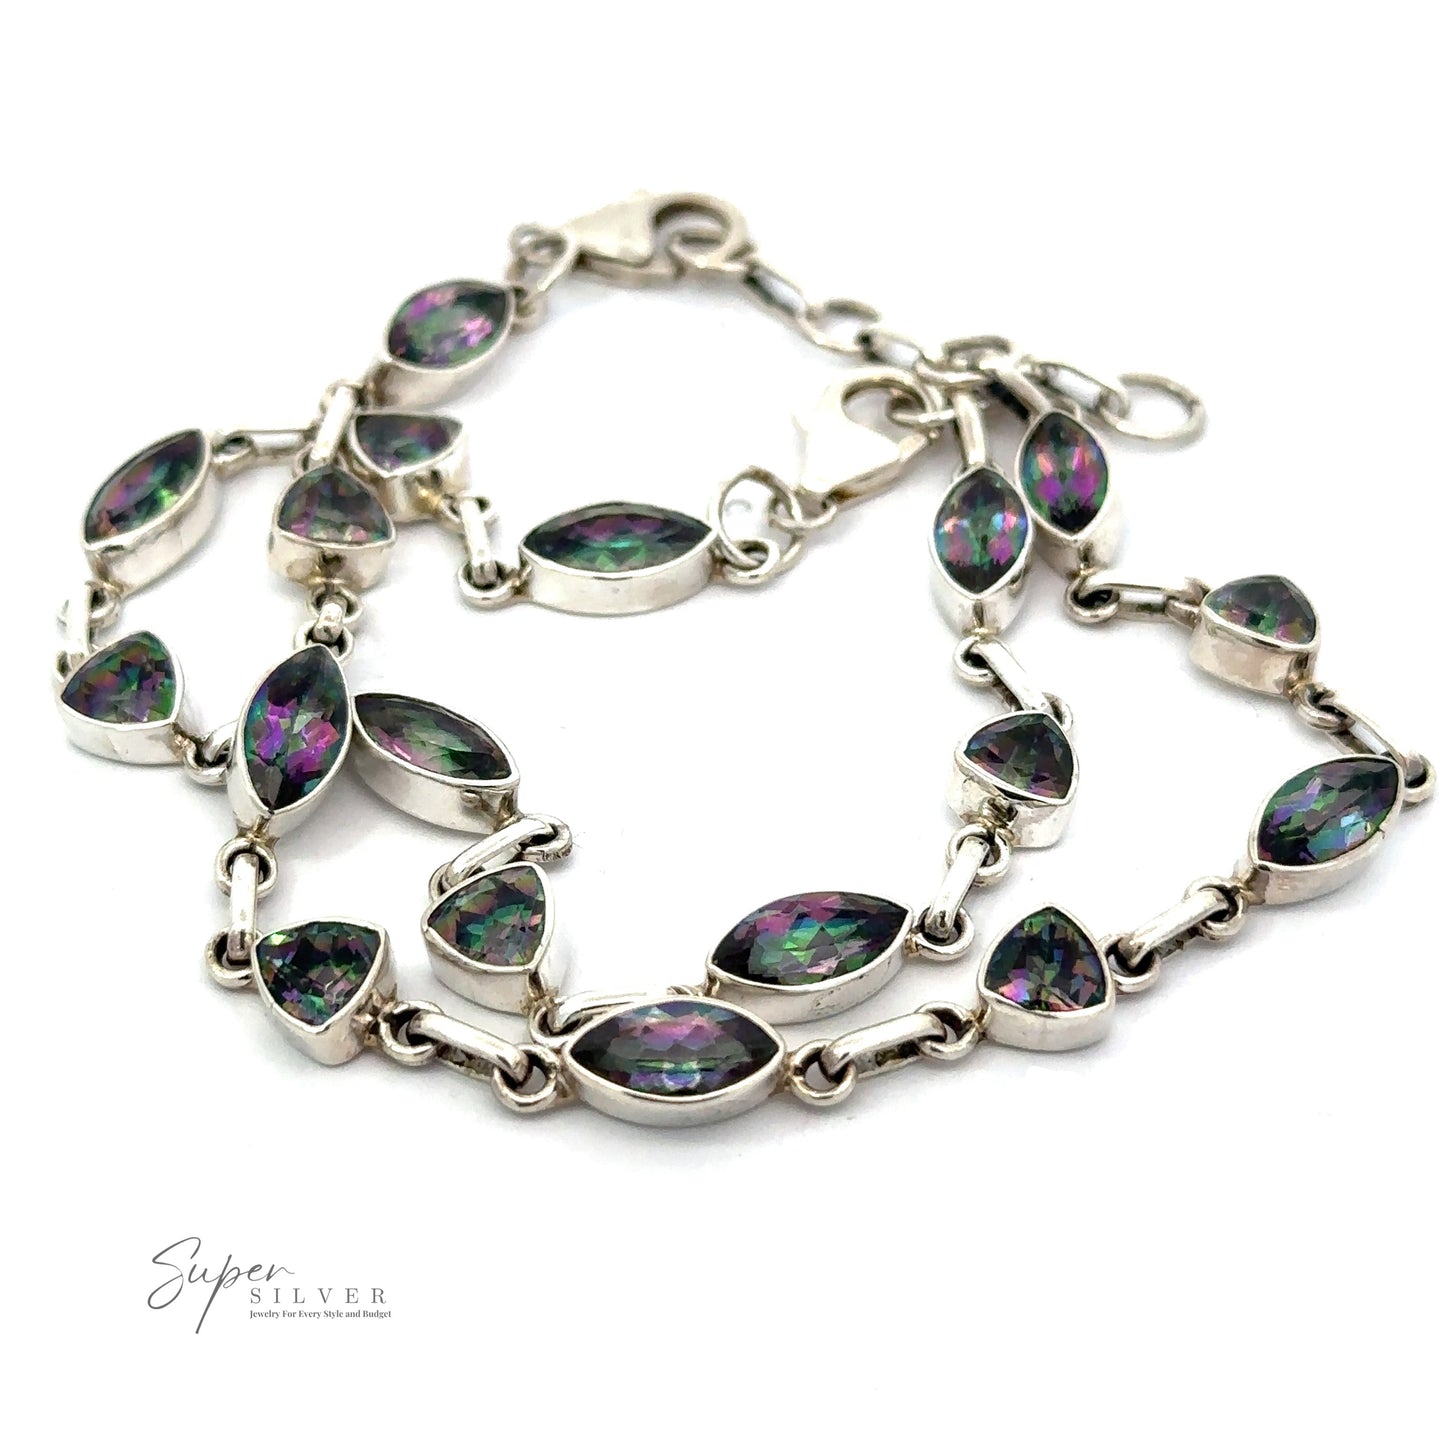 
                  
                    A Rainbow Mystic Topaz Marquise and Triangle Shape Link Bracelet featuring marquise-shaped mystic topaz gemstones with green and purple hues, laid out on a white background. The bracelet has a lobster clasp closure, showcasing the "Super Silver" logo.
                  
                